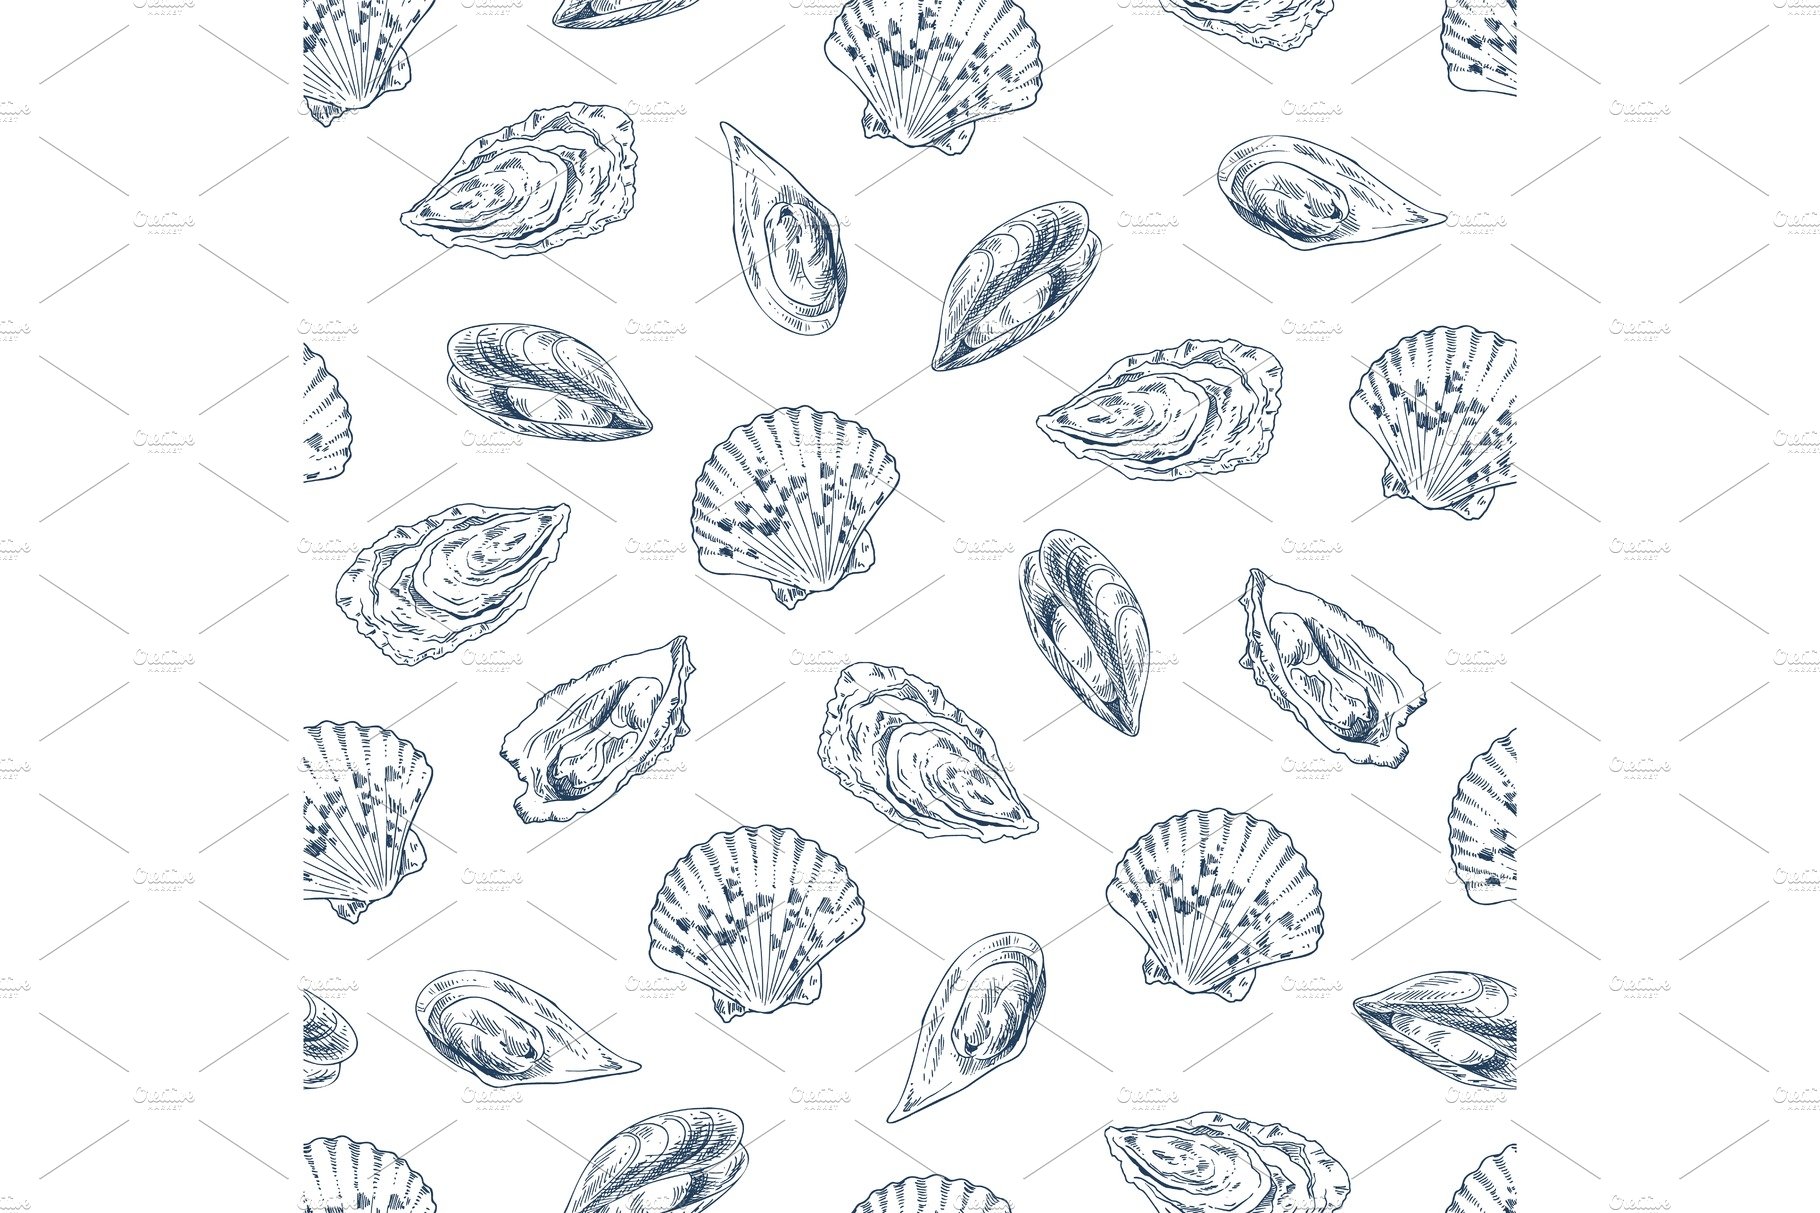 Mussel and Scallop Pattern Vector cover image.